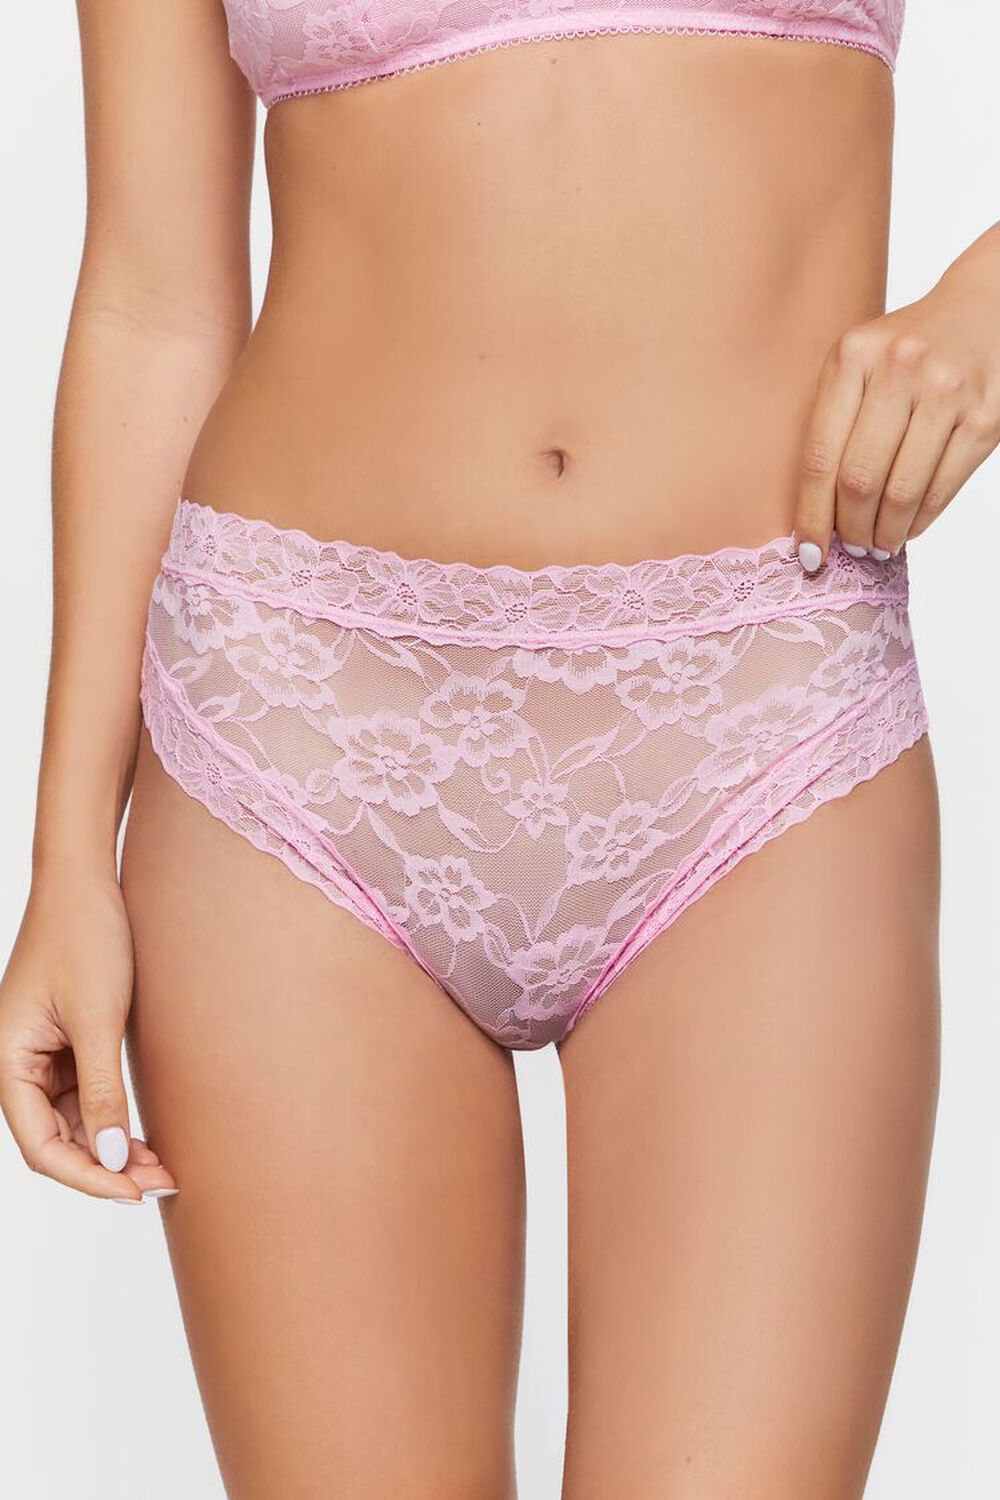 PINK ICING Floral Lace Cheeky Panties, image 2